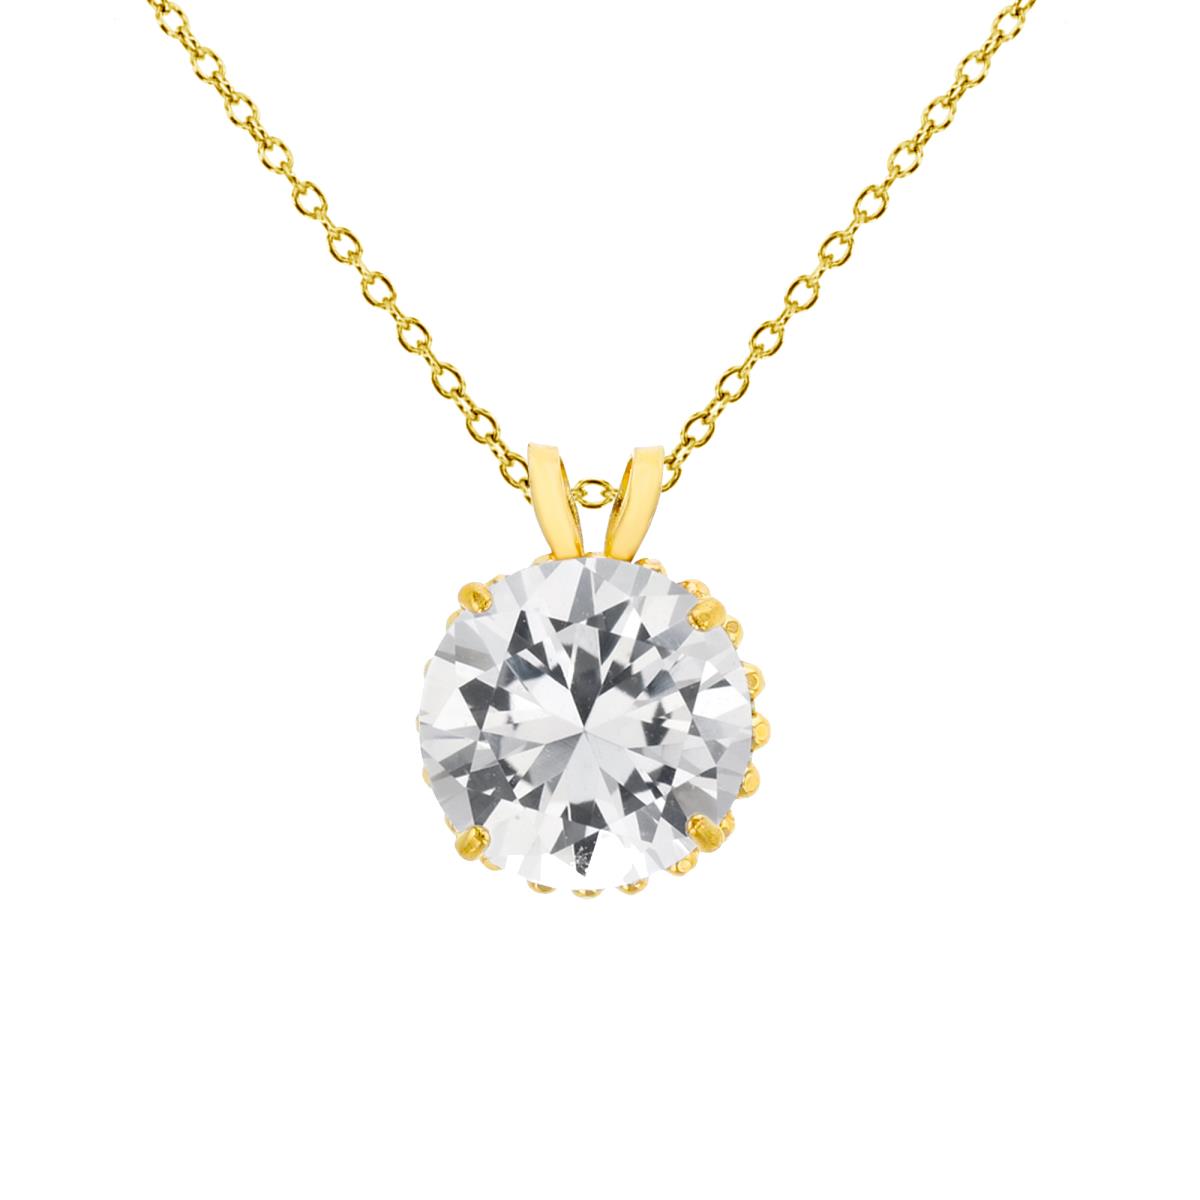 10K Yellow Gold 8mm Round Cut CZ with Bead Frame Rabbit Ear 18" Necklace